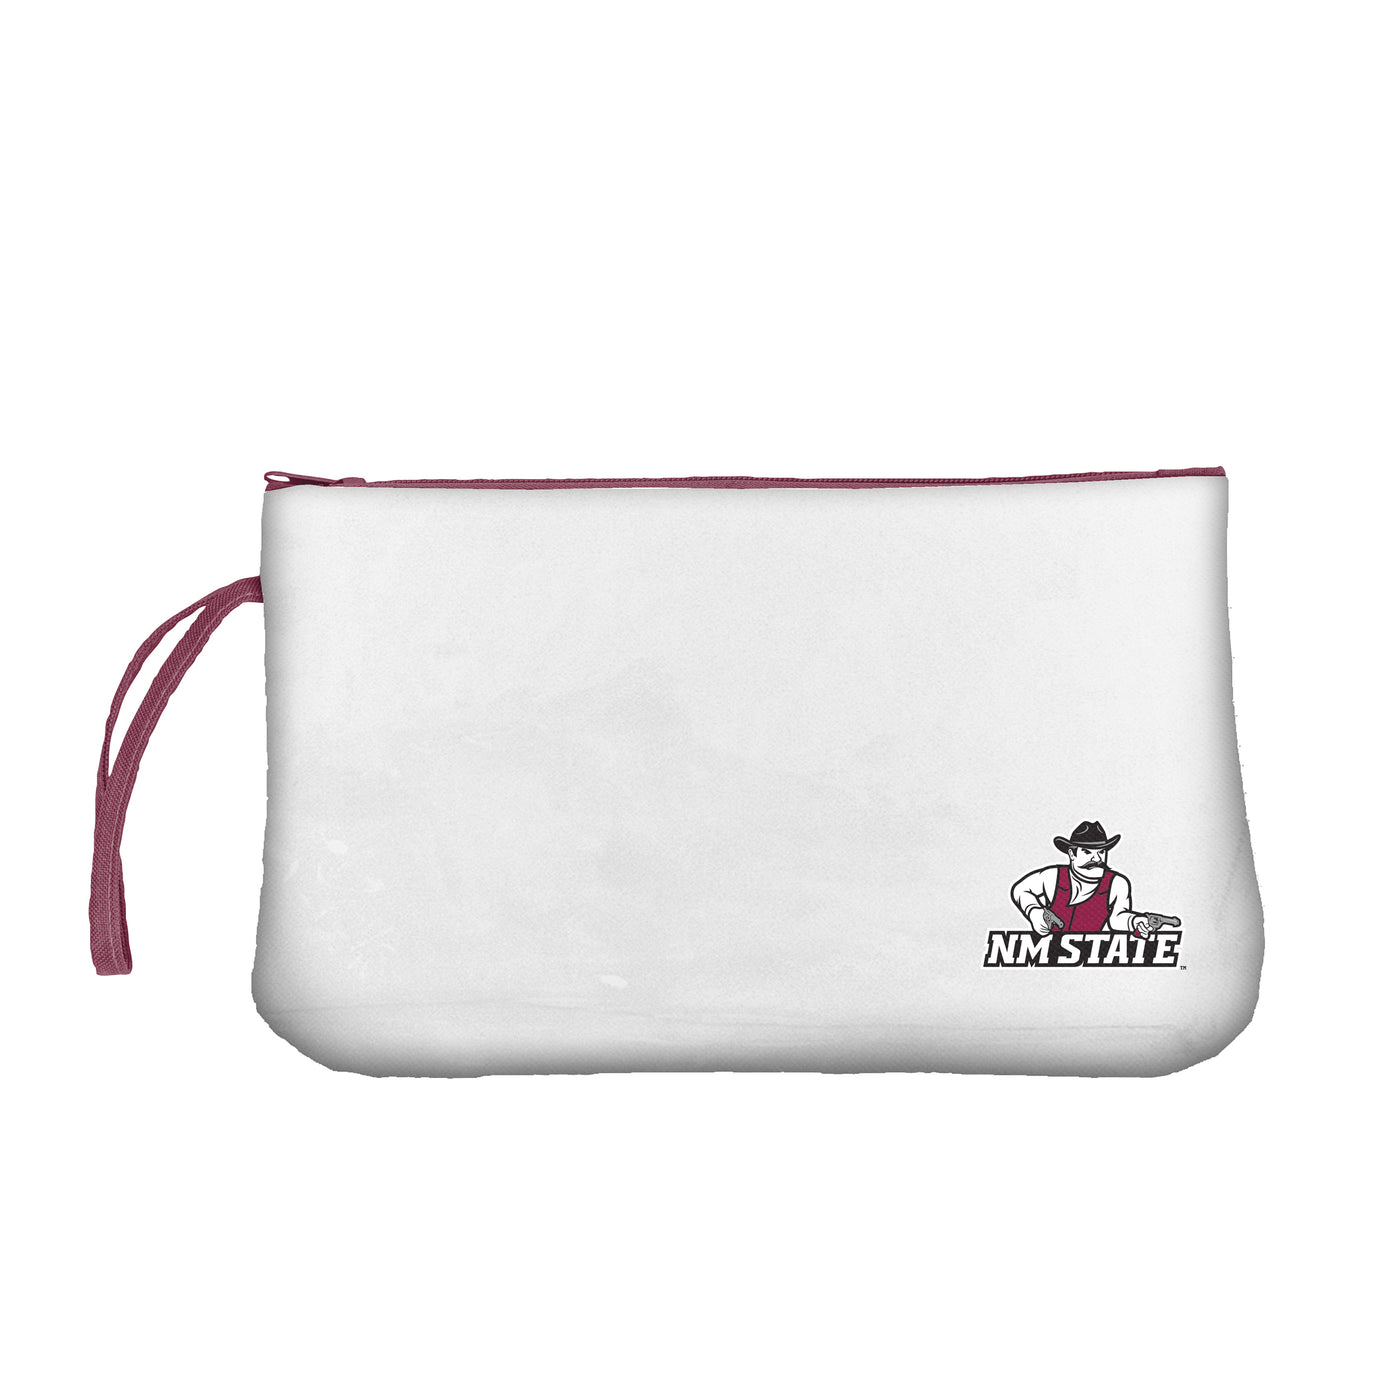 New Mexico State clear wristlet